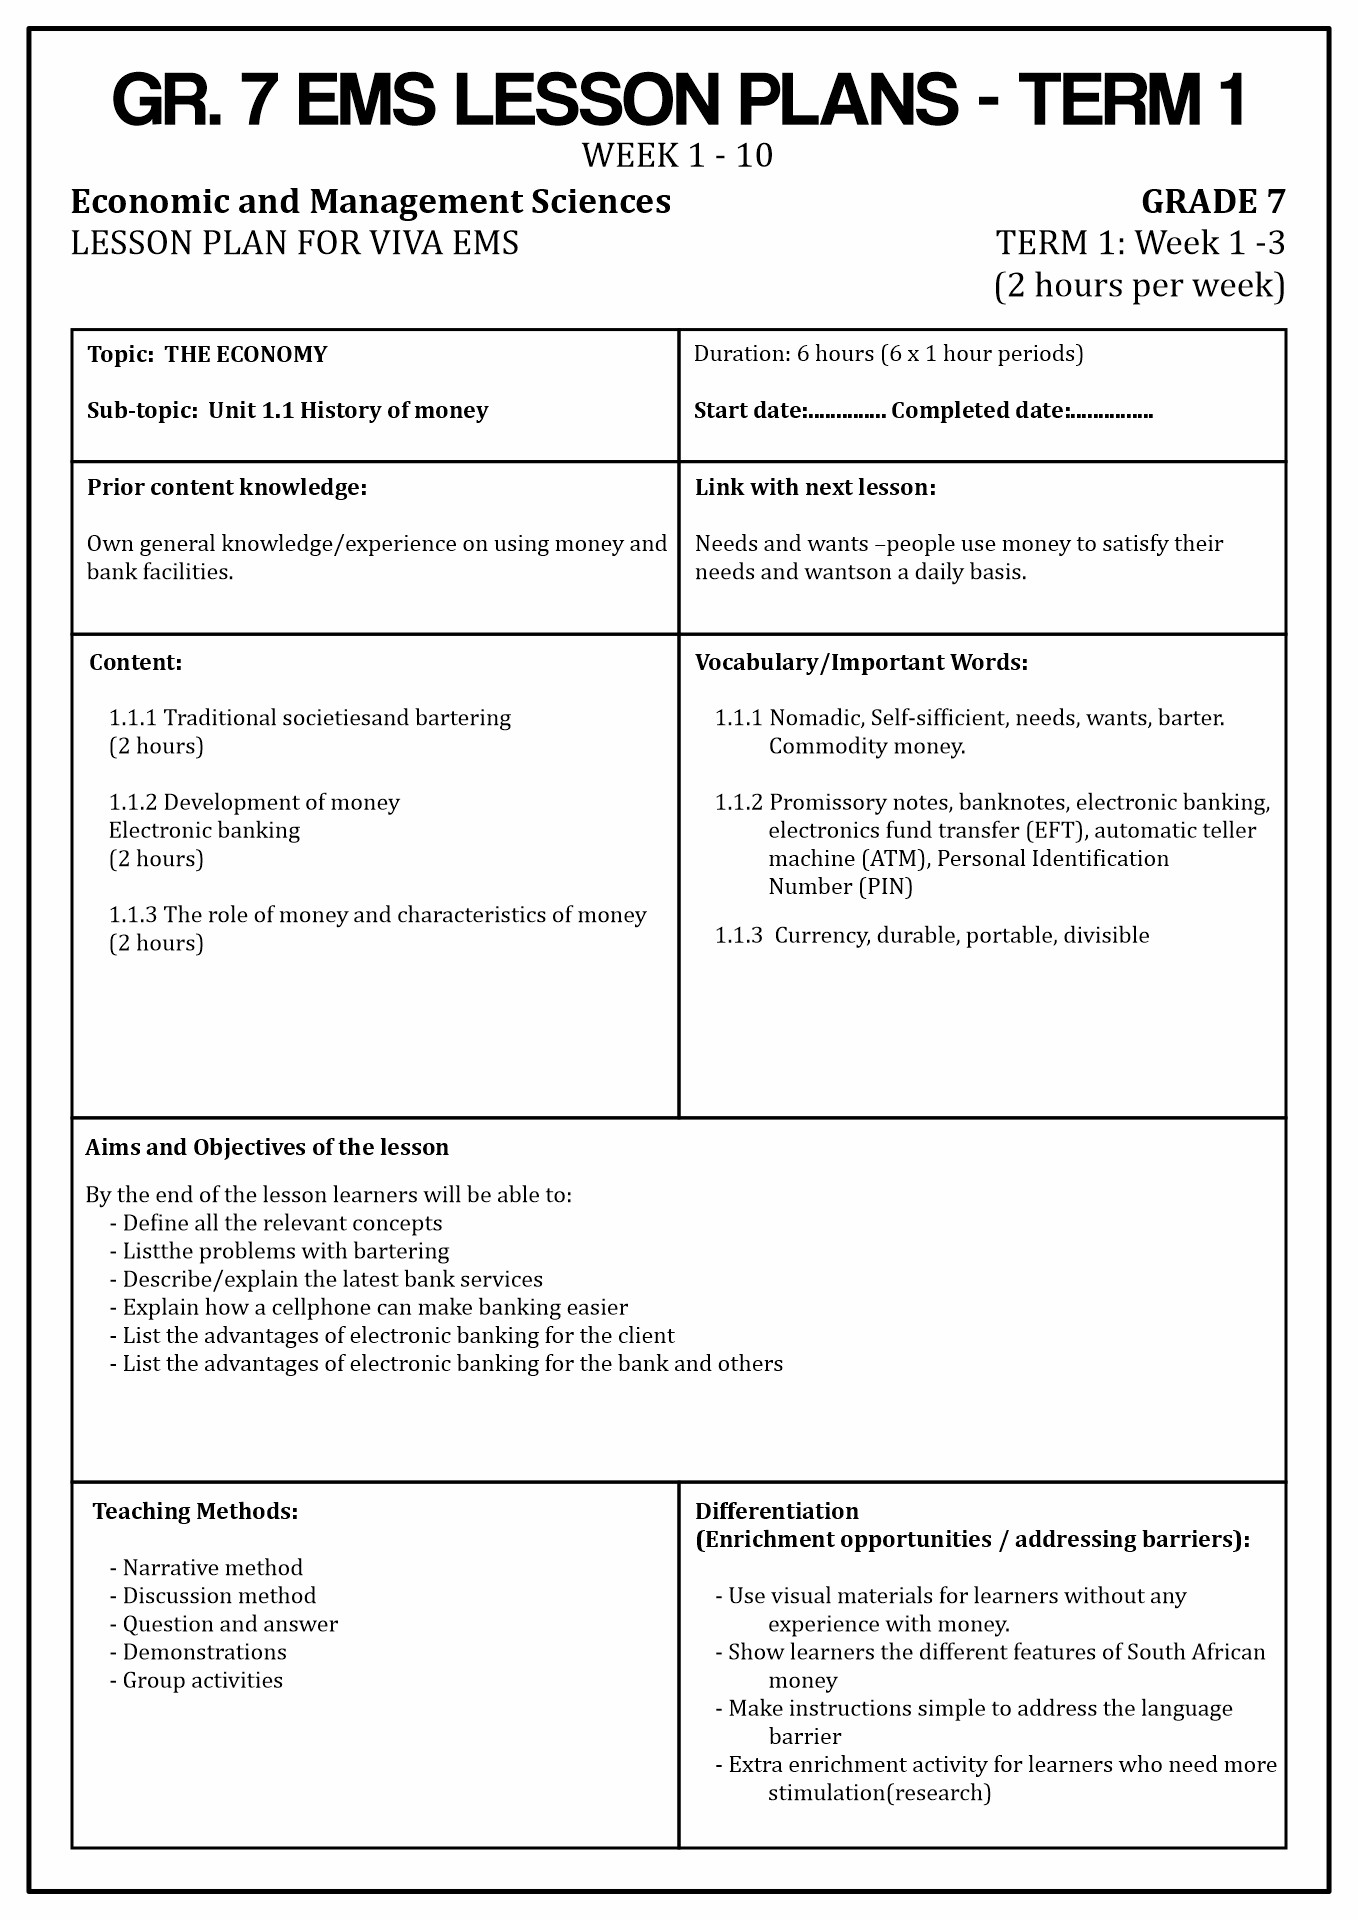 EMS Lesson Plan Template Image